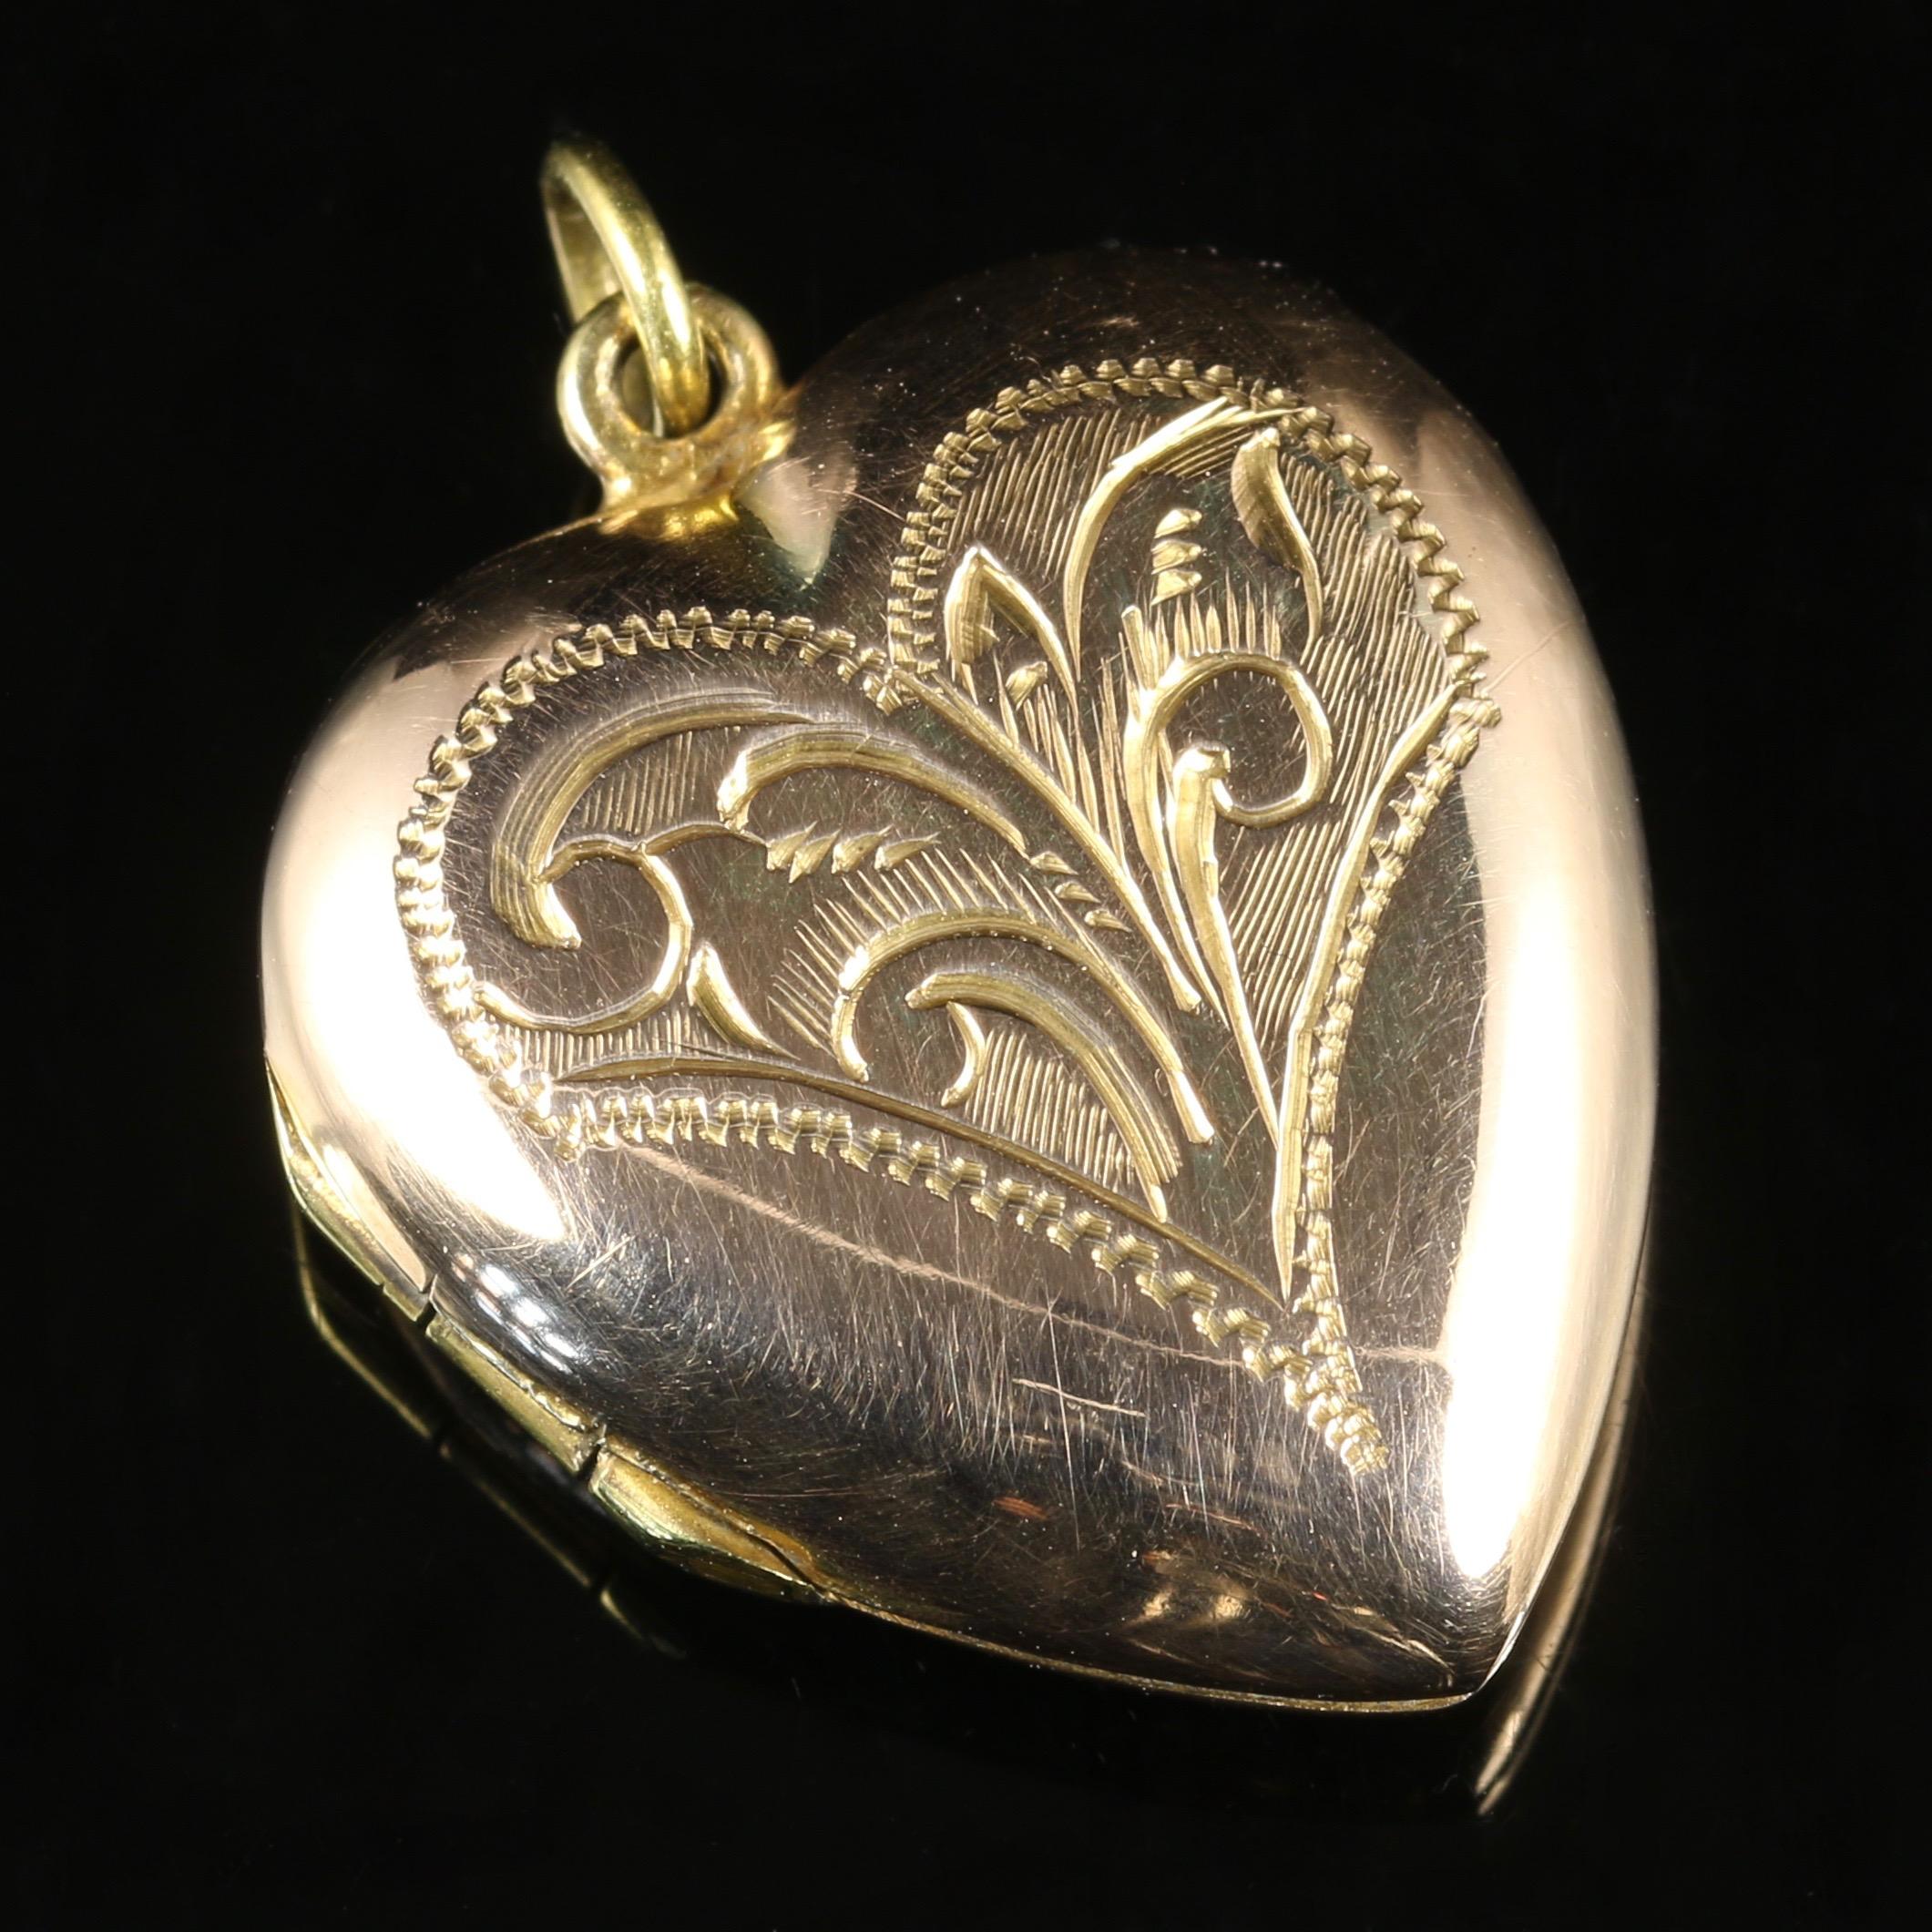 For more details please click continue reading down below...

This antique Victorian Gold locket is in the shape of a love heart and is adorned with lovely engraving on the front.

Circa 1890.

The locket is set in 9ct Gold back and front.

It has